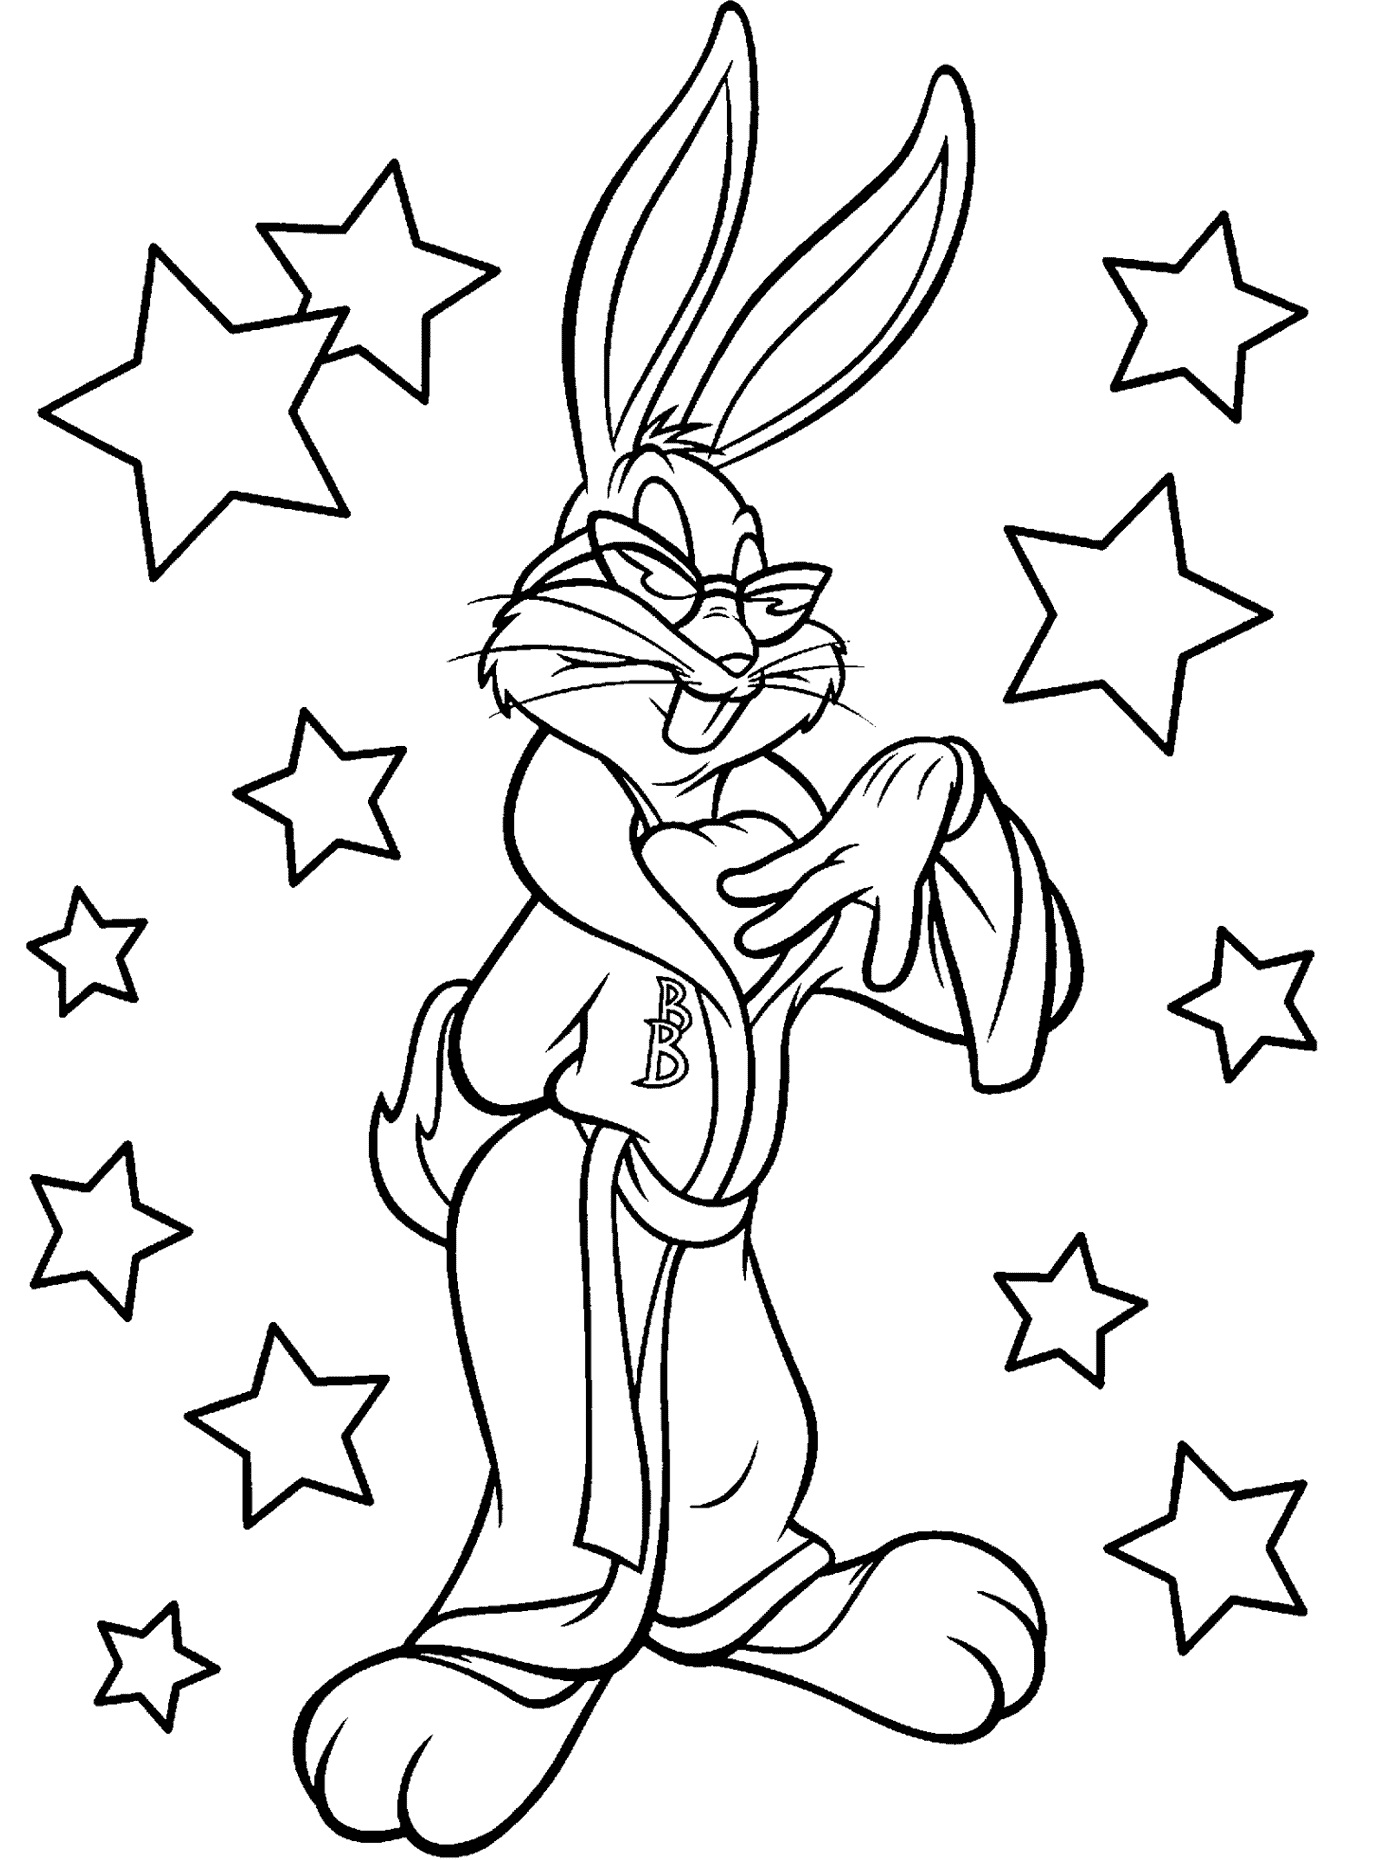 Cartoon Bugs Bunny Coloring Pages for Adult